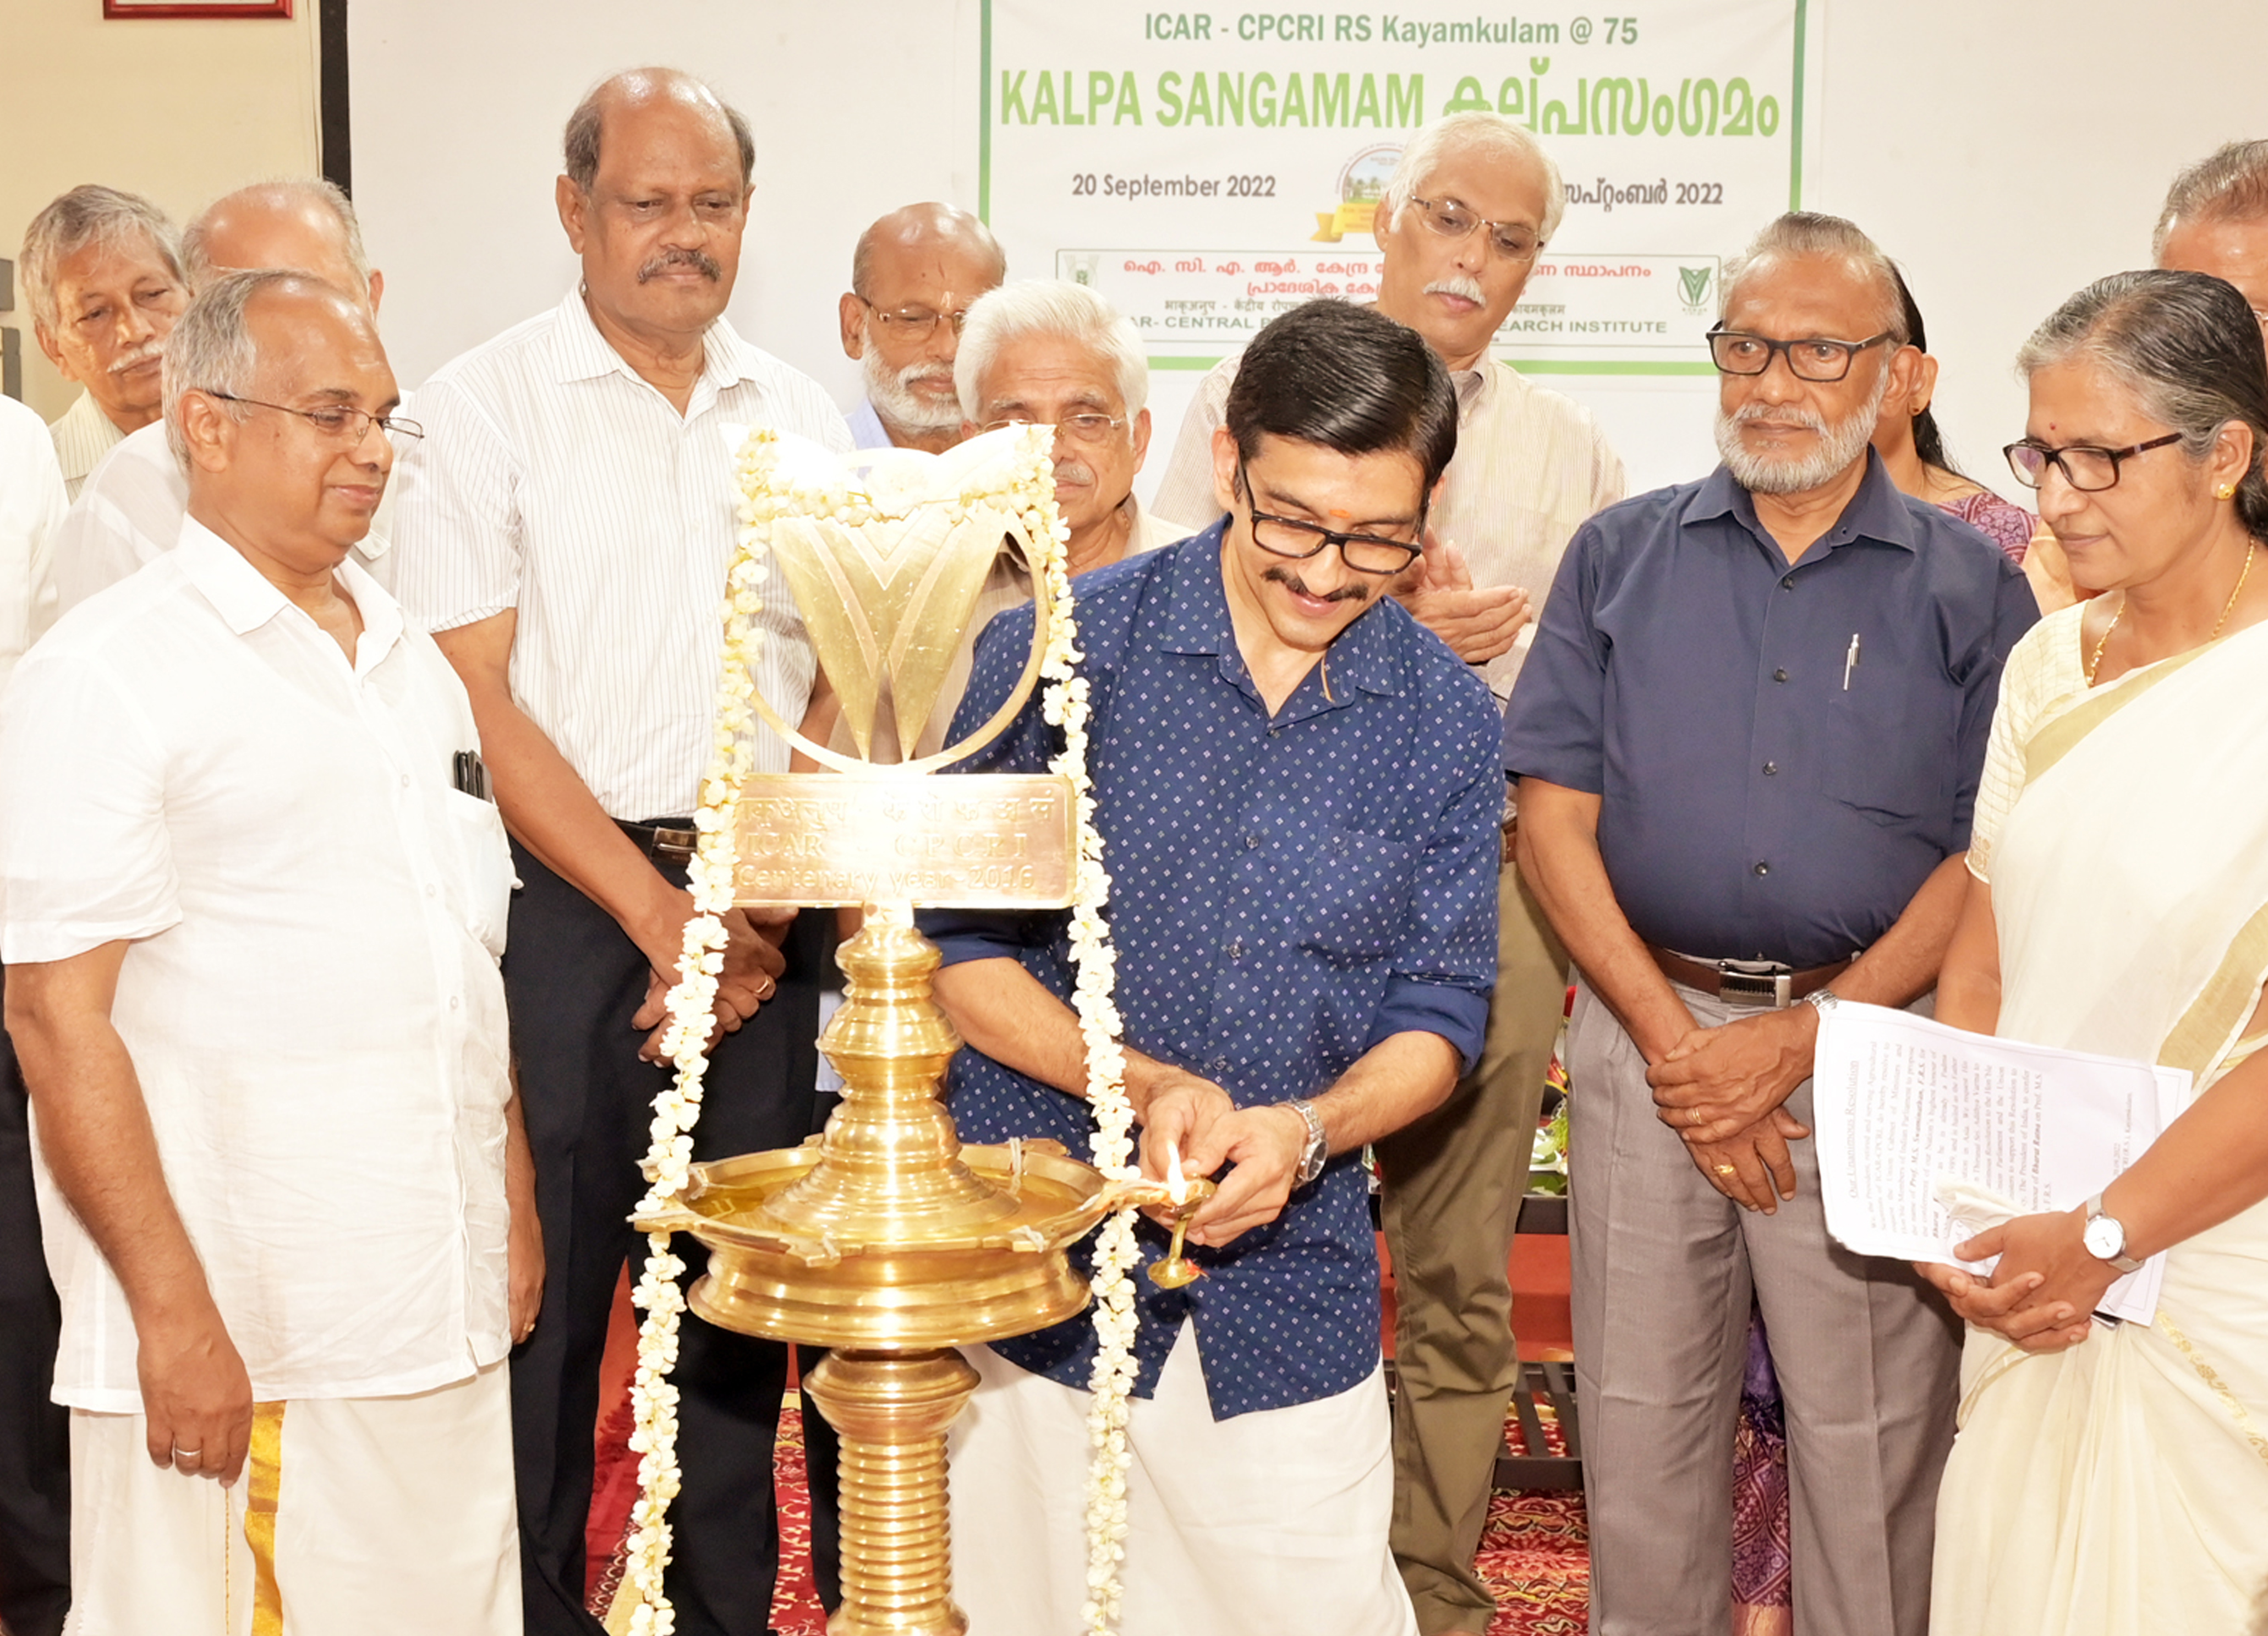 Photo for Kalpa Sangamam-An assemblage of 75 years of service to coconut community convened at Kayamkulam on 20-09-2022